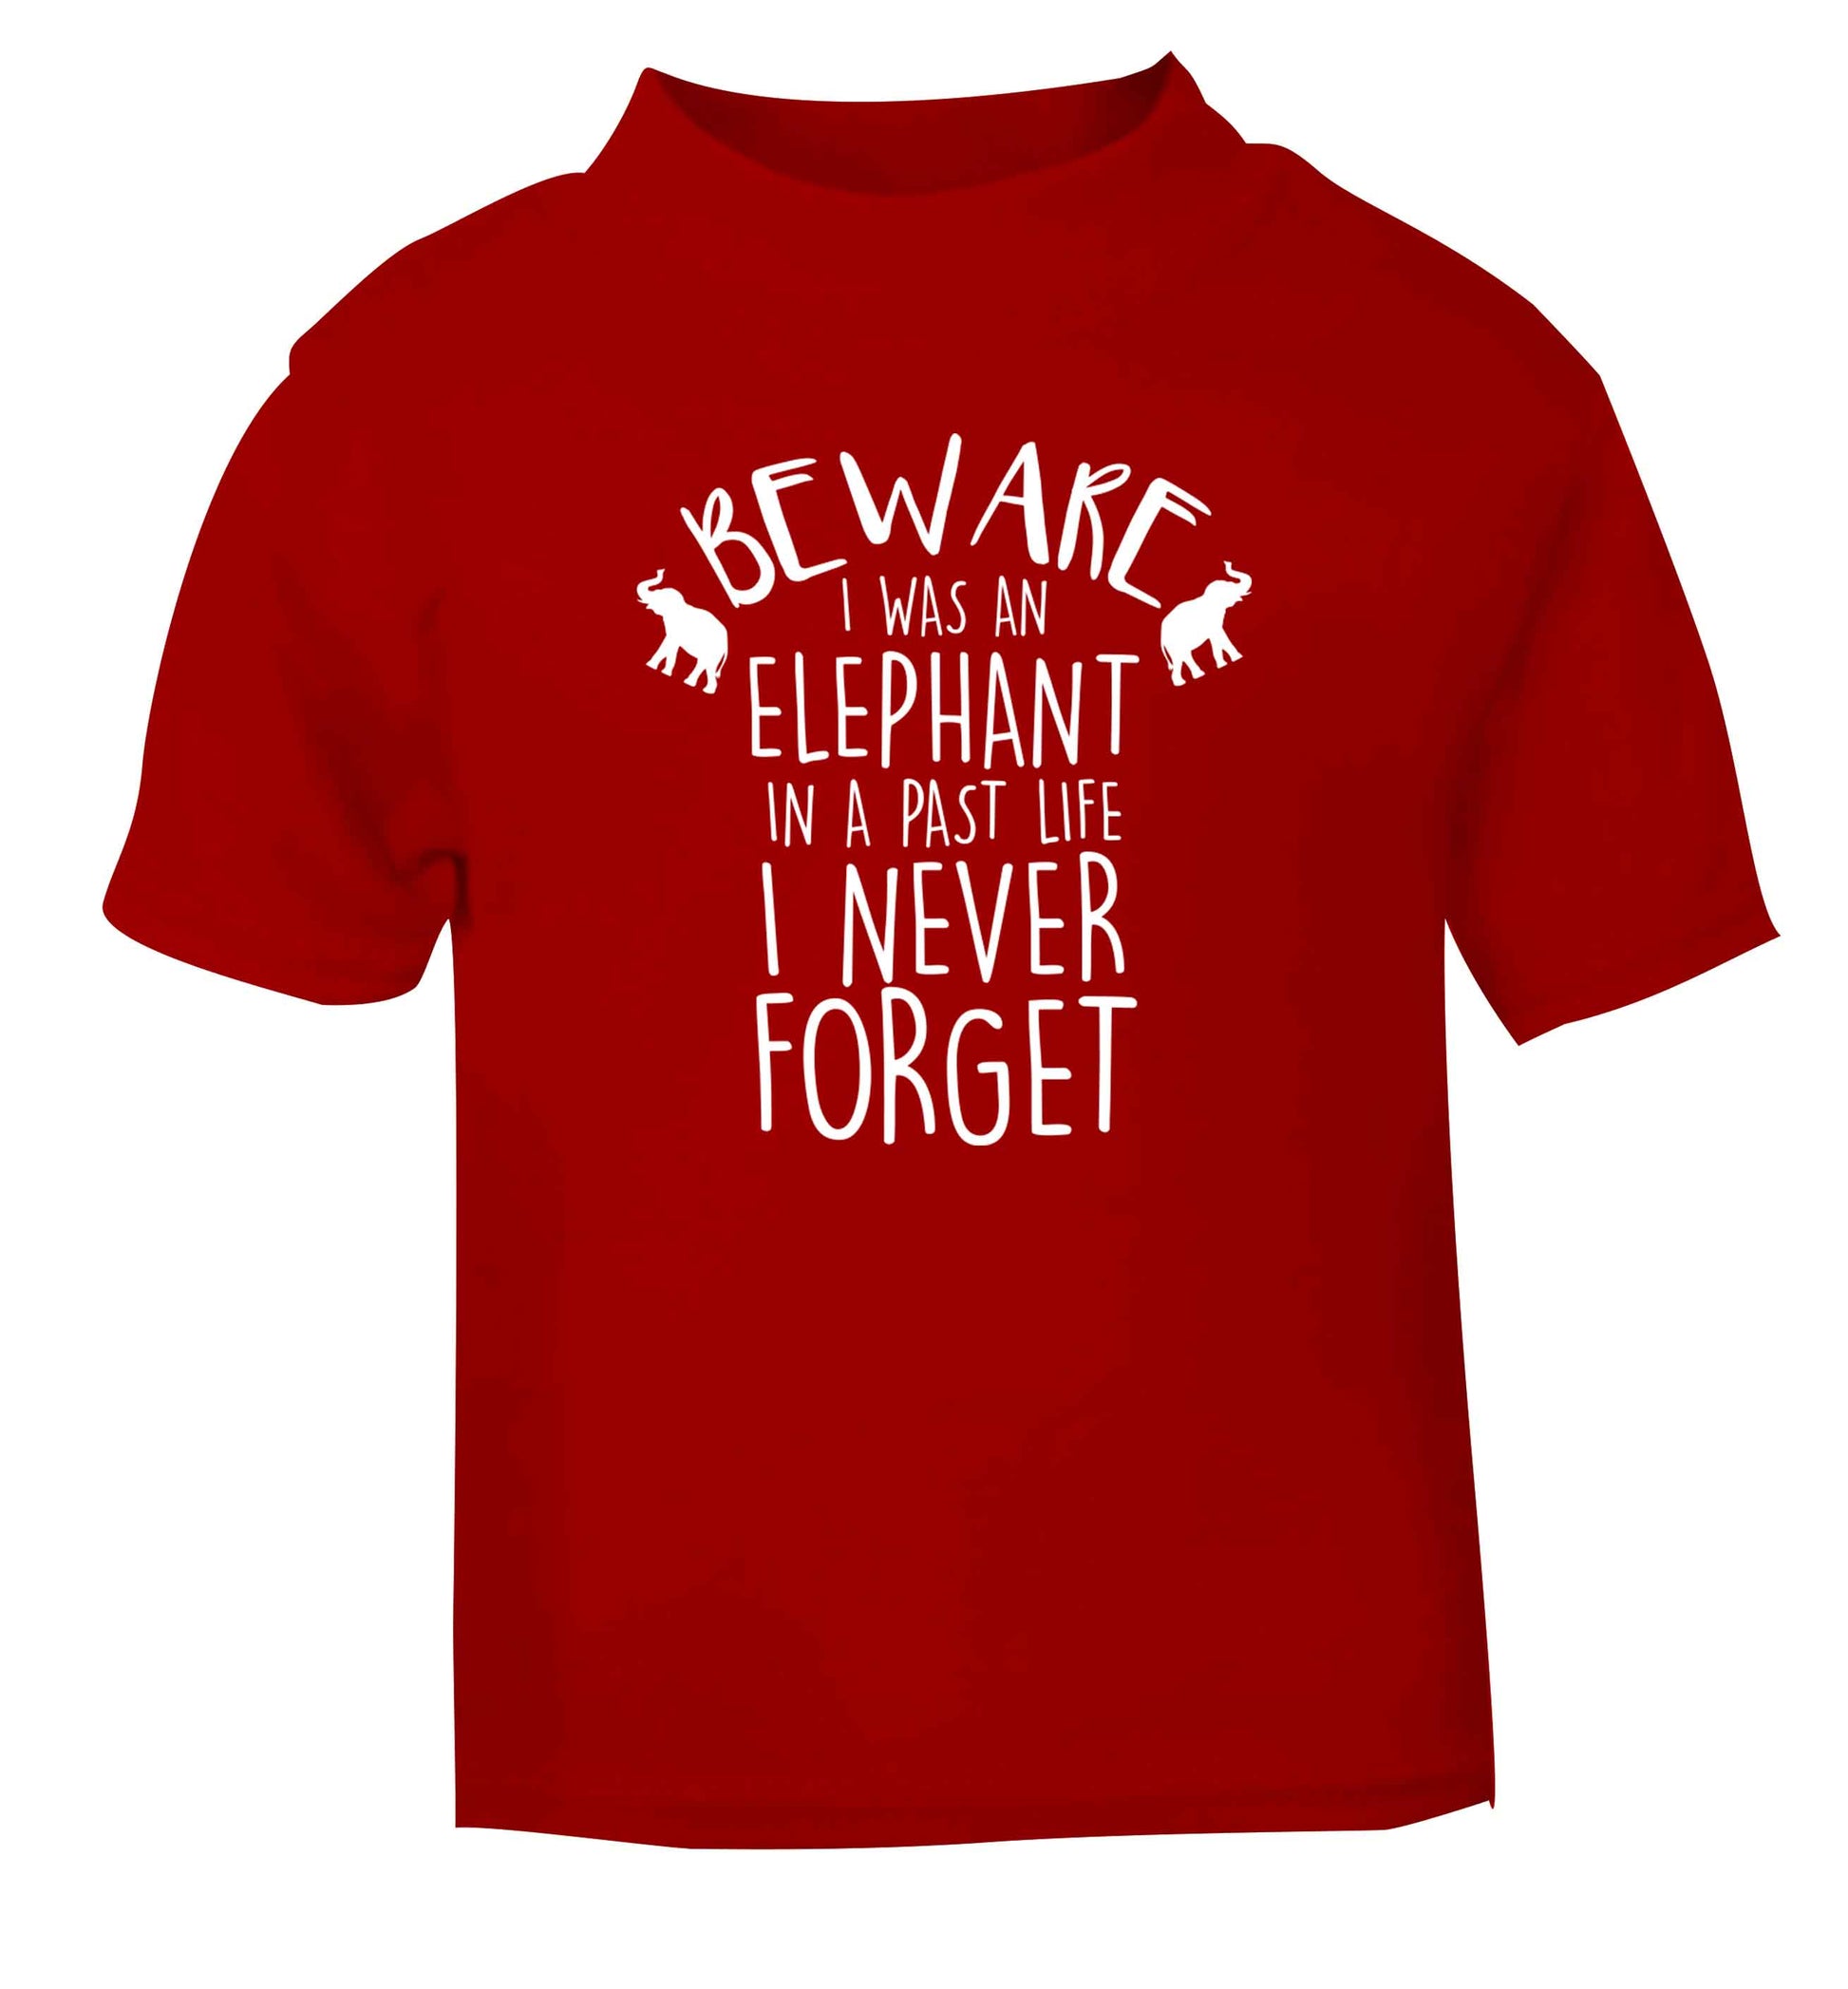 Beware I was an elephant in my past life I never forget red Baby Toddler Tshirt 2 Years